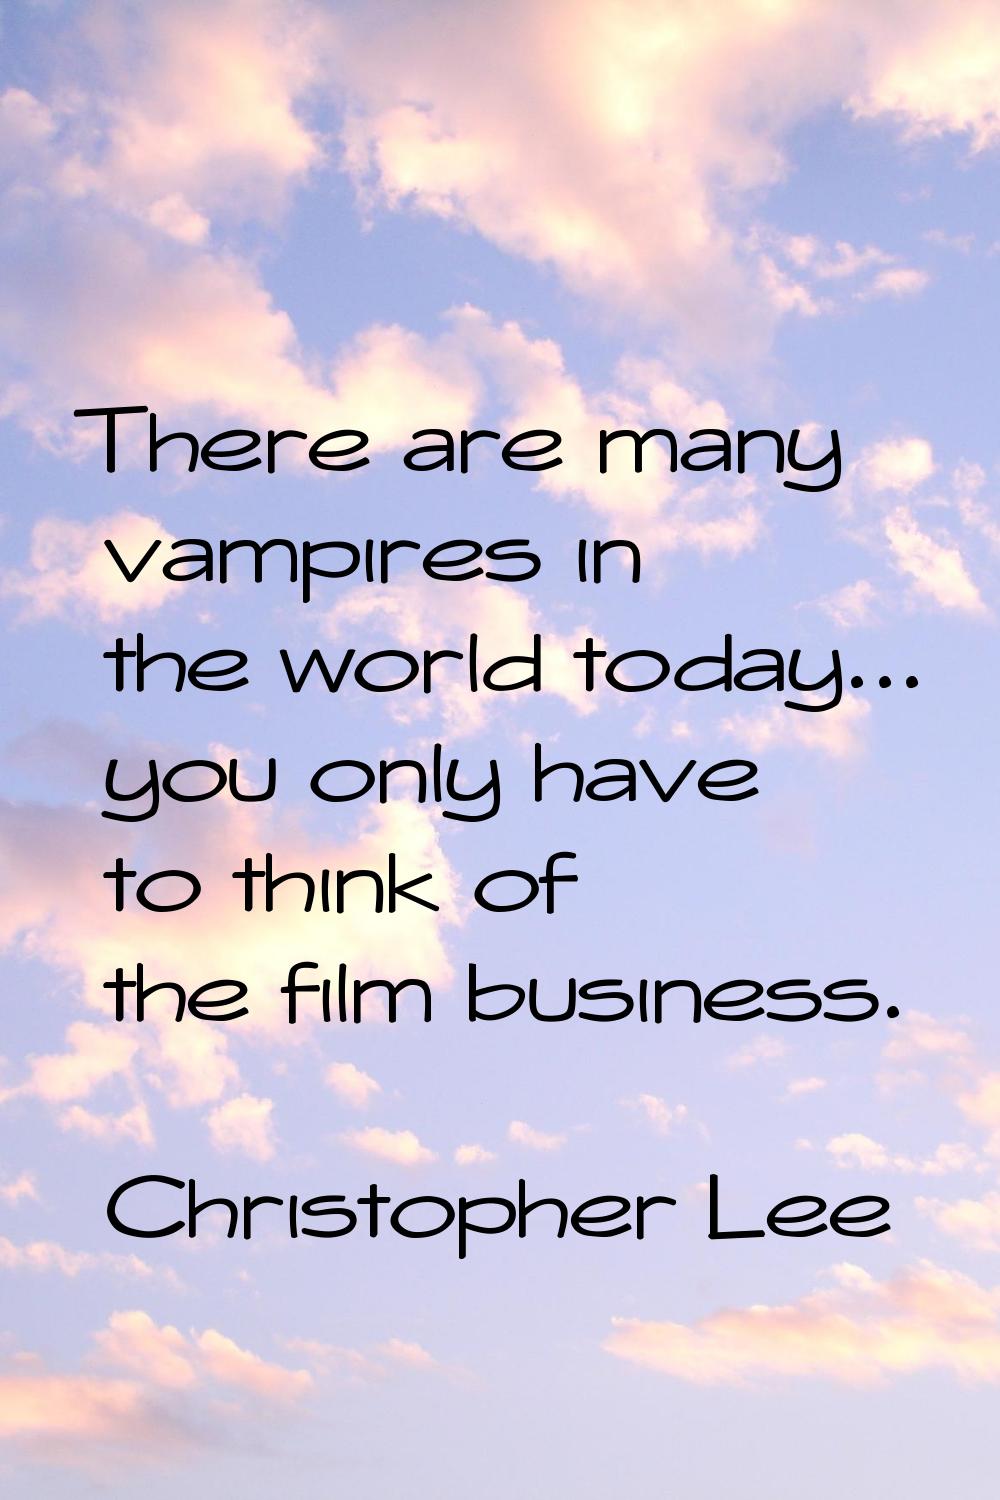 There are many vampires in the world today... you only have to think of the film business.